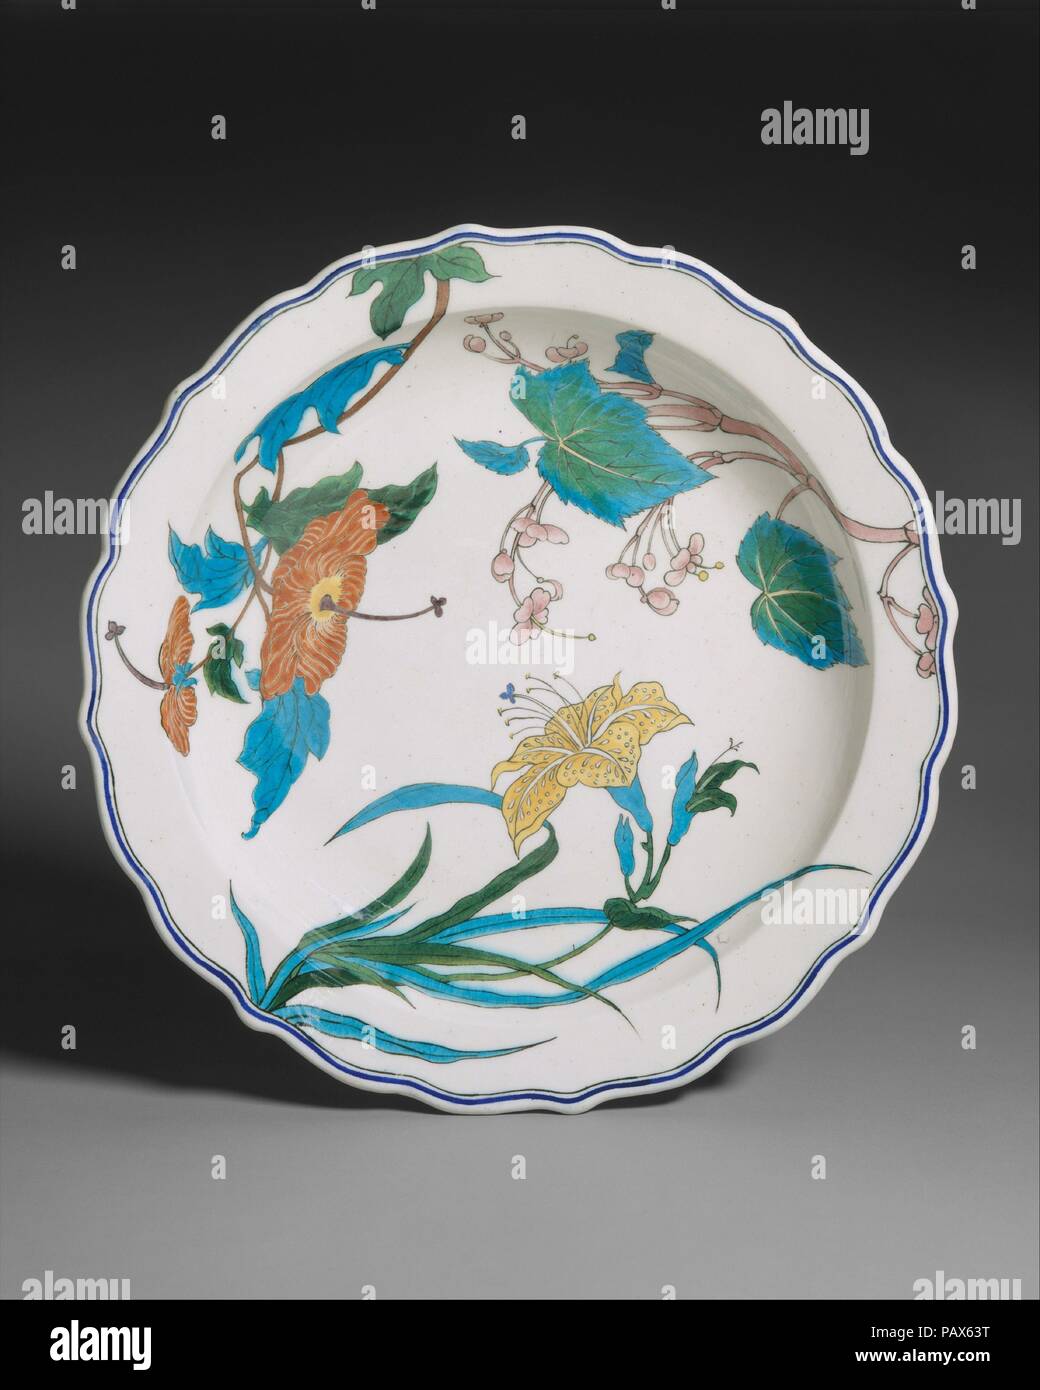 Dish. Culture: French, Paris. Dimensions: Diameter: 16 in. (40.6 cm). Maker: Joseph-Théodore Deck (French, Guebwiller, Alsace 1823-1891 Paris). Date: 1866.  Determined that pottery vessels should be regarded as true works of art, avant-garde ceramicists in France in the last decades of the nineteenth century transformed their craft into an intellectual and emotional endeavor. The pioneers of this revival were Jean Carriès, Ernest Chaplet, Théodore Deck, and Auguste Delaherche. These revolutionary artist-potters embraced artisanal traditions while pursuing lost techniques through exhaustive exp Stock Photo